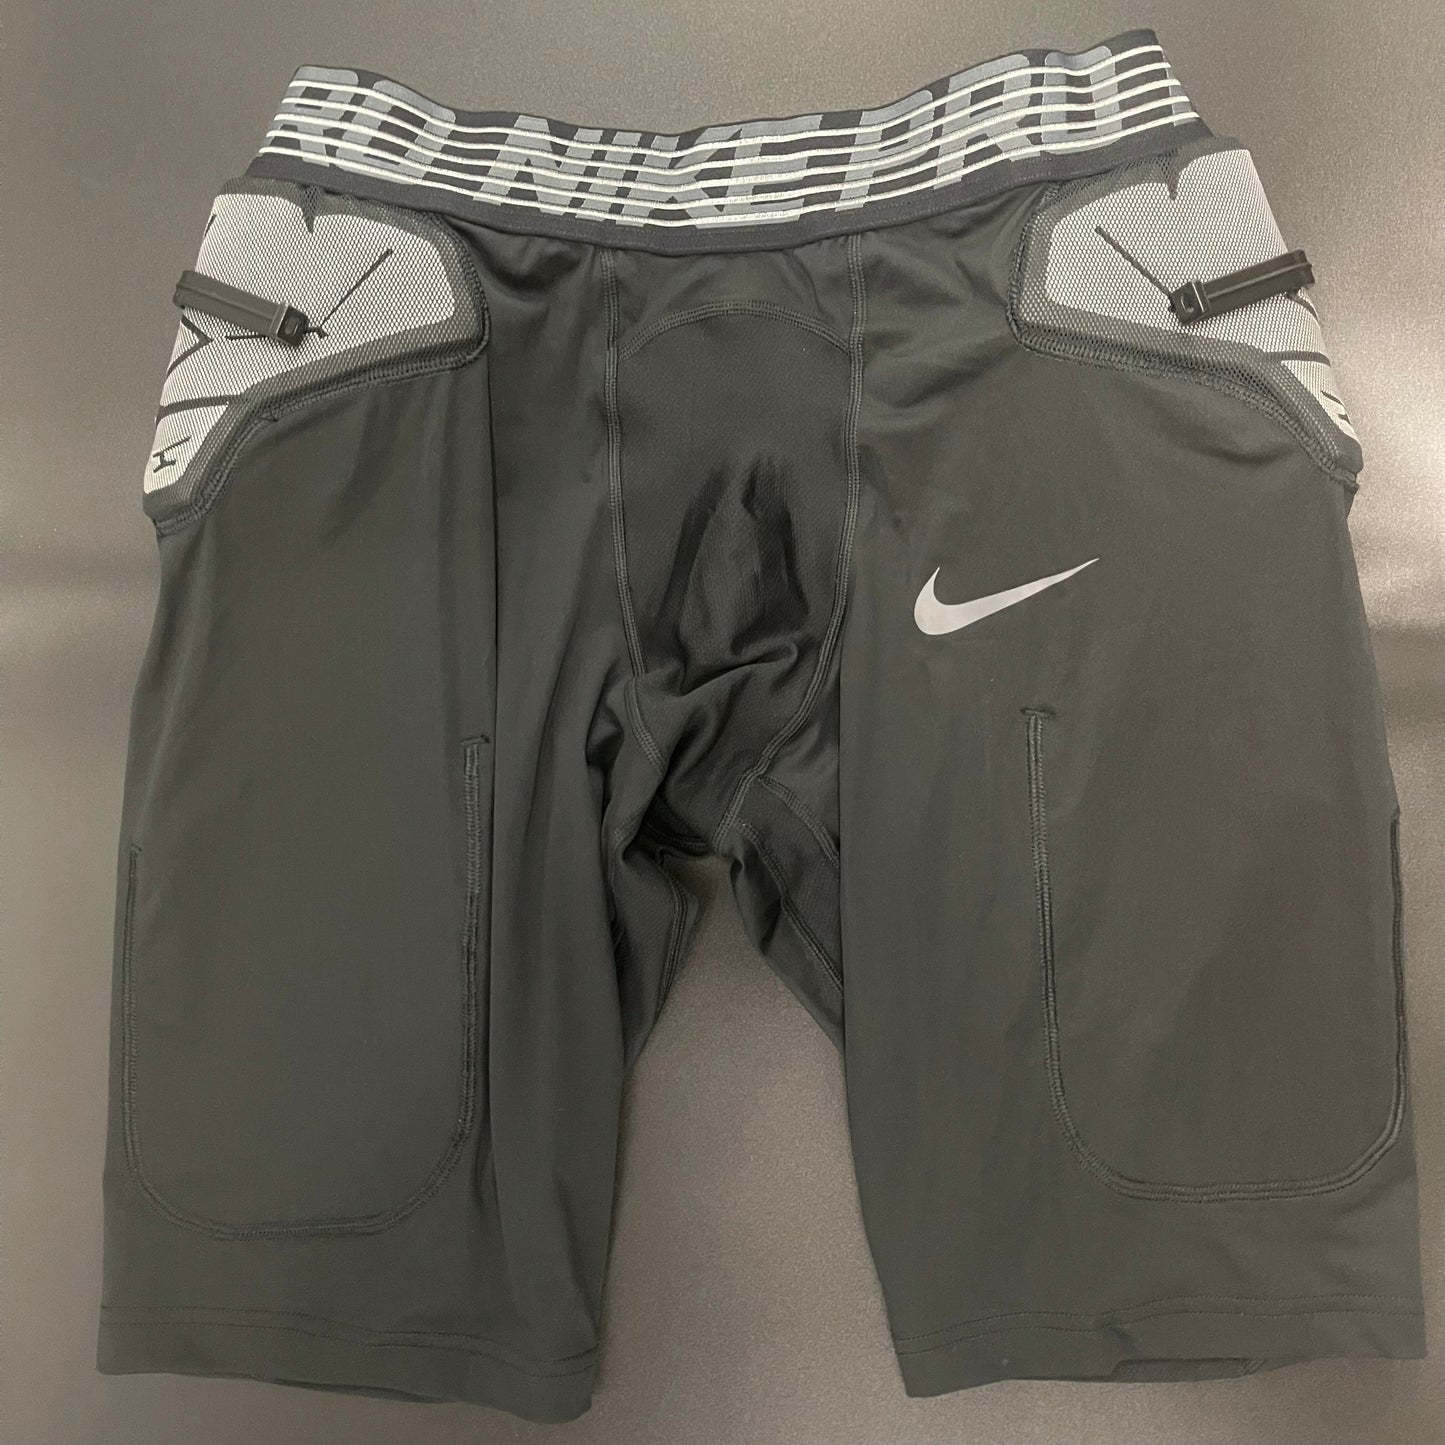 Nike Pro Hyperstrong 3-Pad Girdle